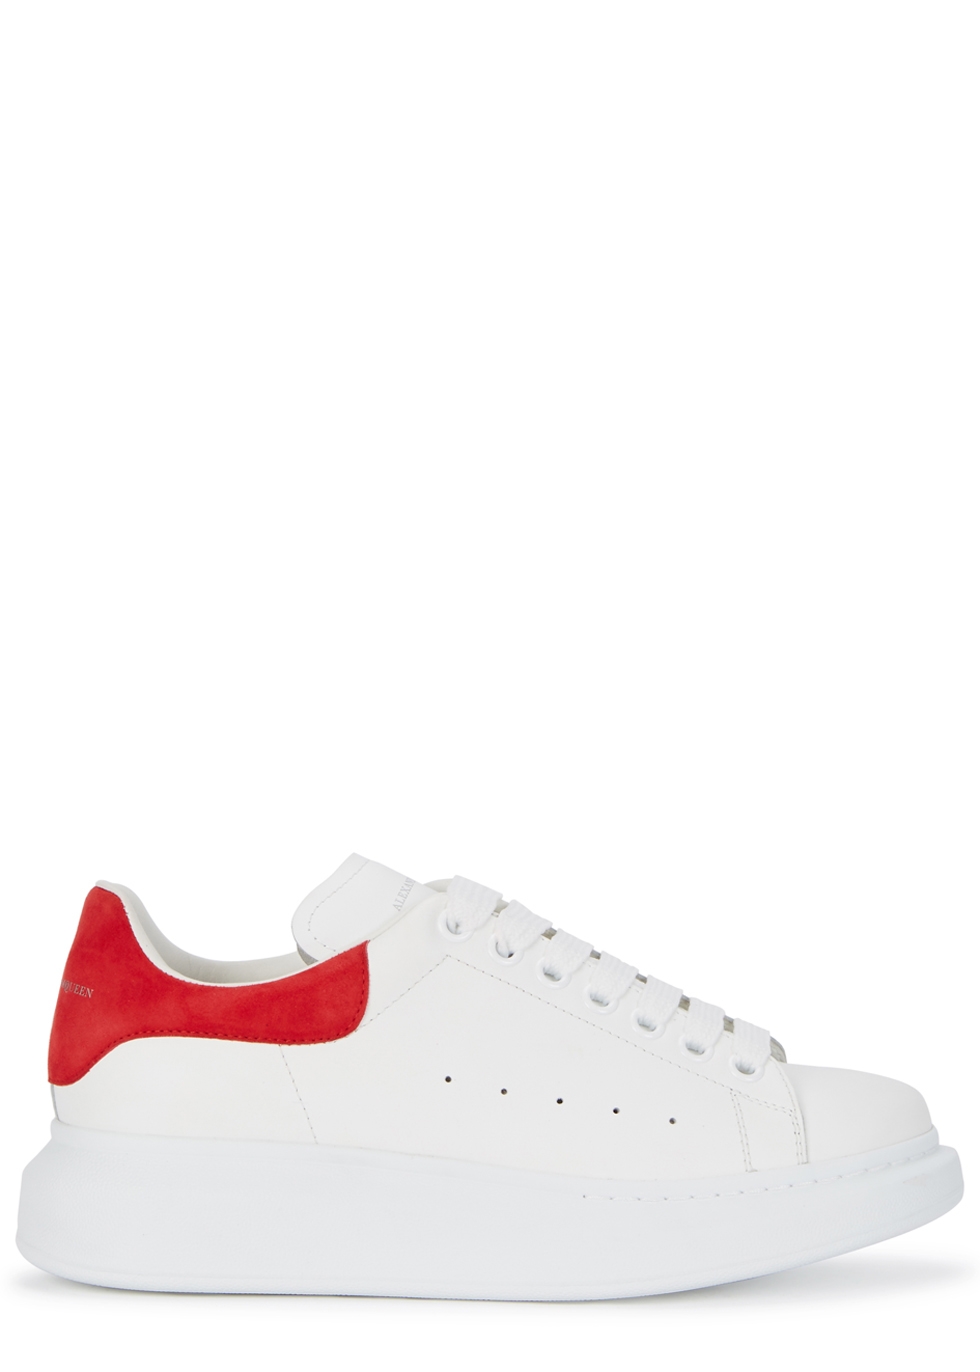 alexander mcqueen white red sneakers